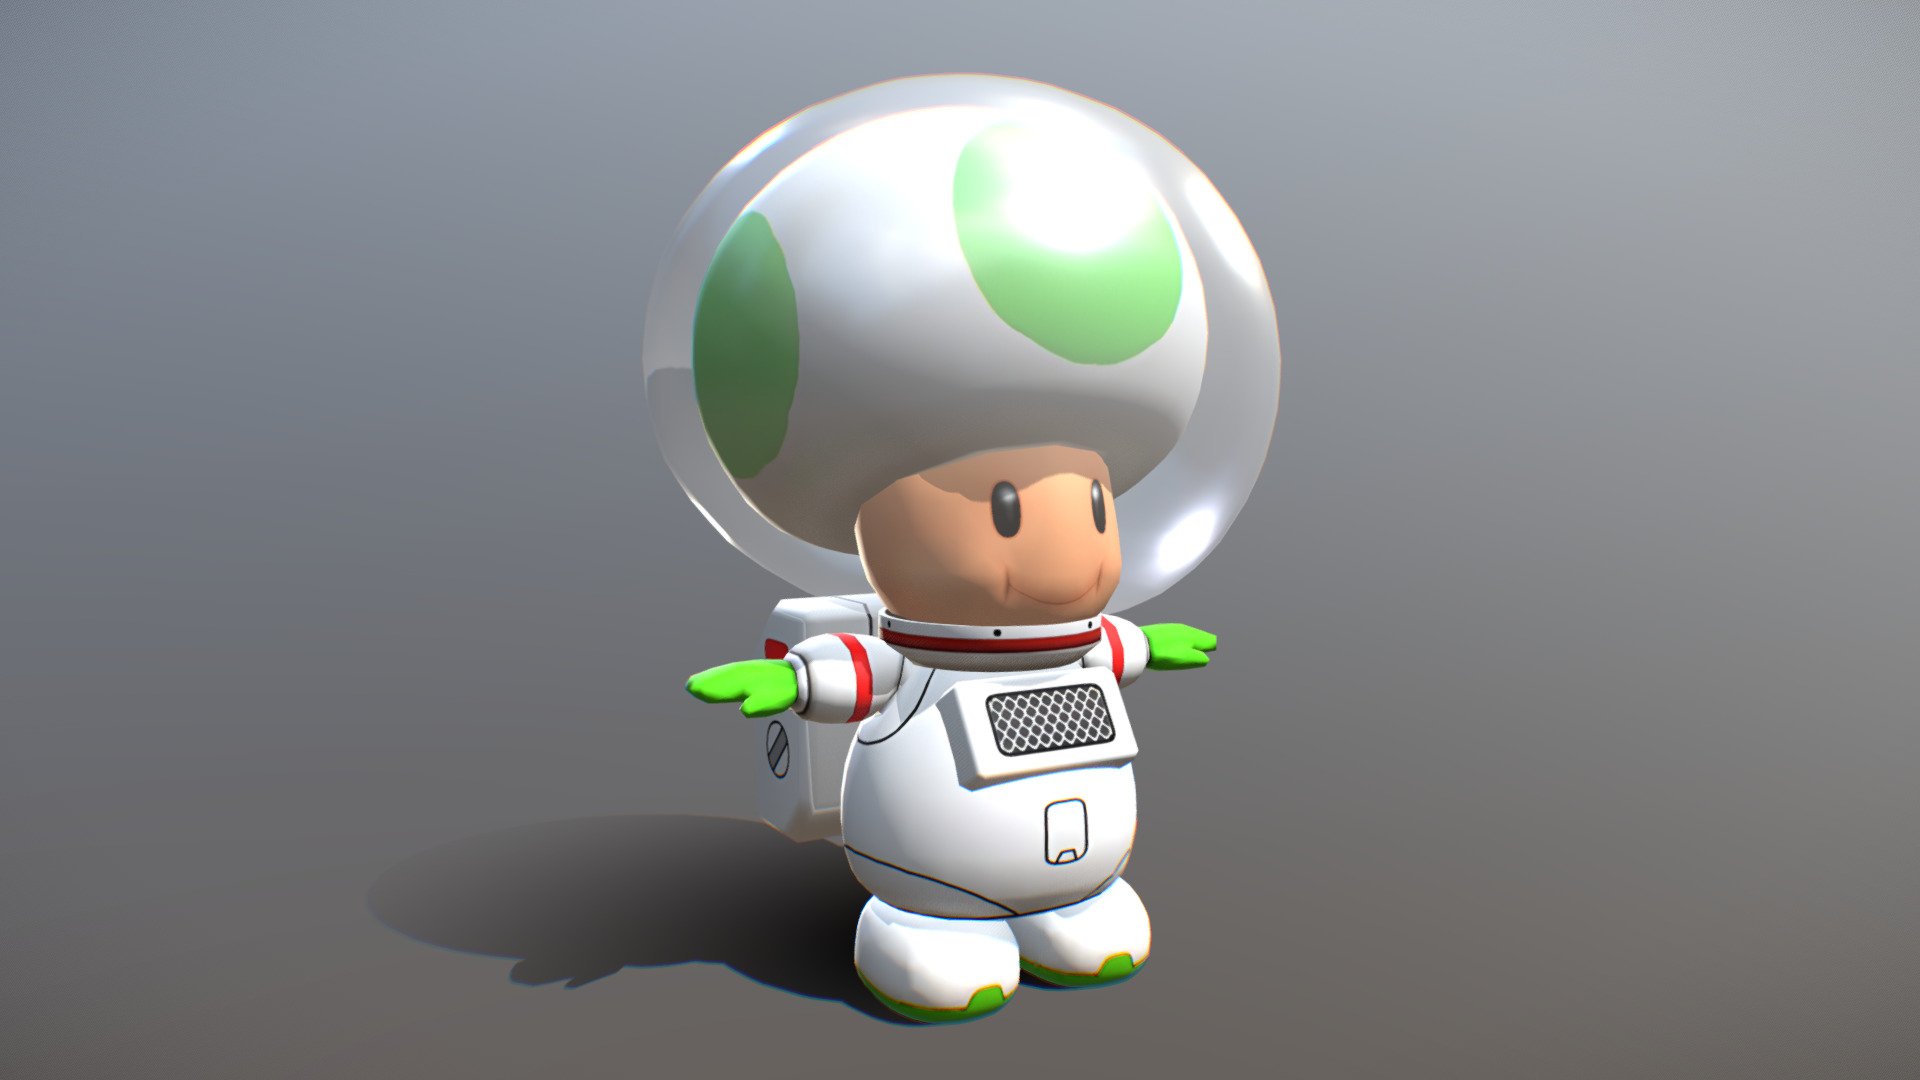 Astronaut Toad Green Hd Mario Kart 8 Buy Royalty Free 3d Model By Xenophilius Xeno 4004